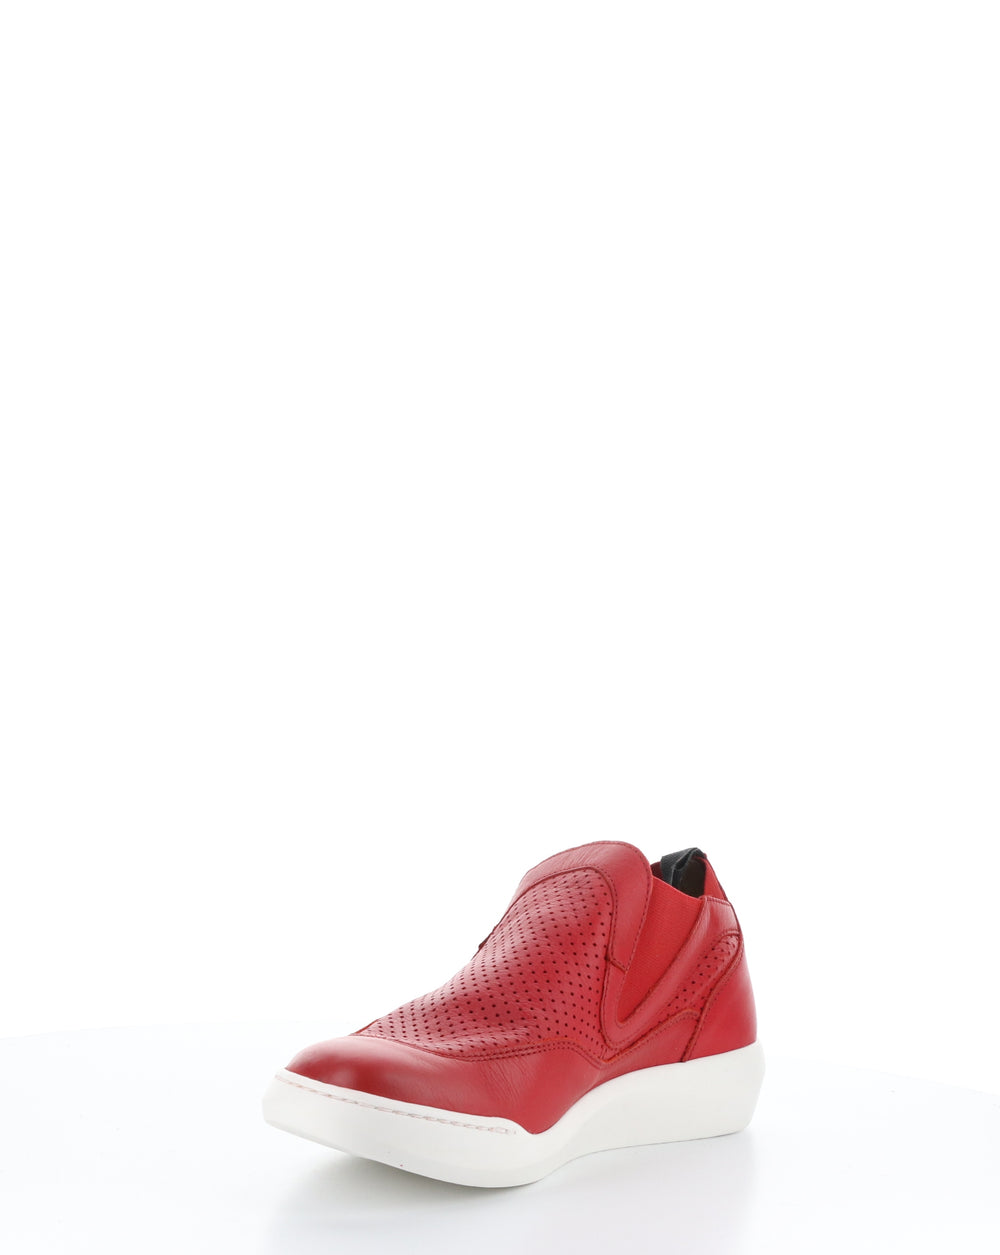 BRAY721SOF 002 CHERRY RED Elasticated Shoes